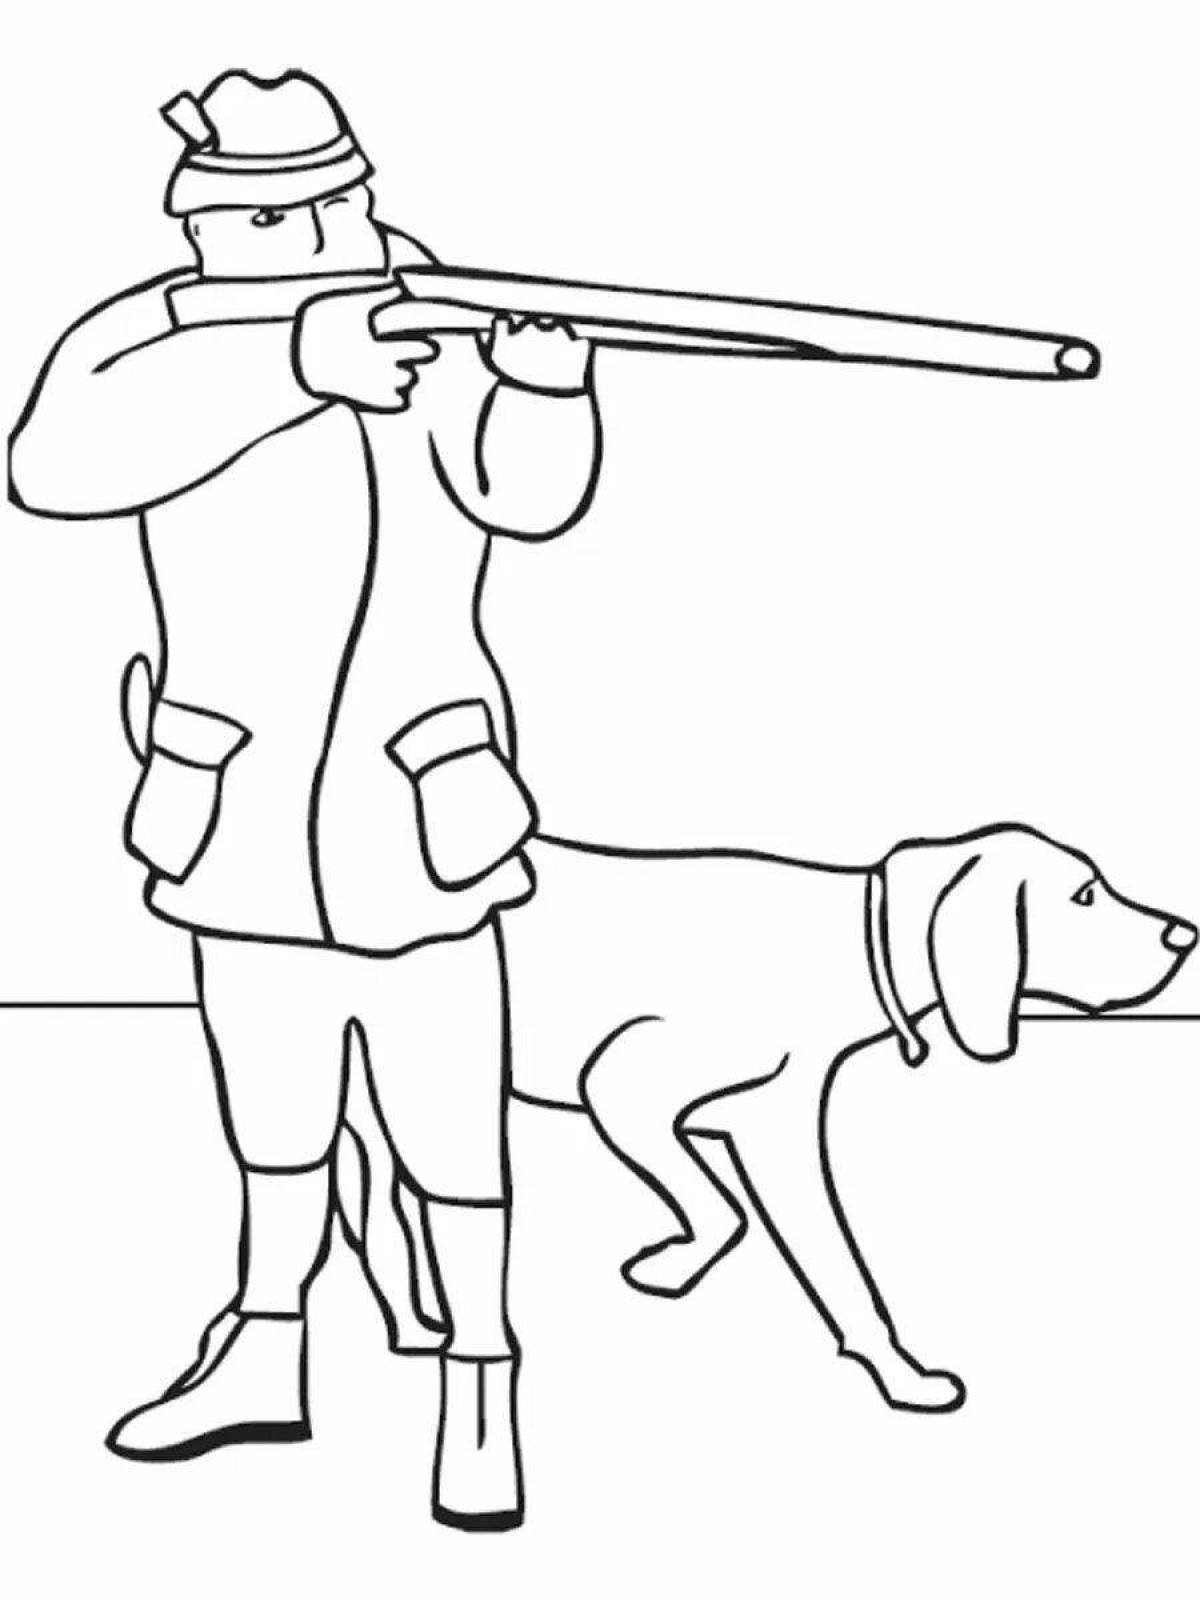 Bright border guard with a dog for children